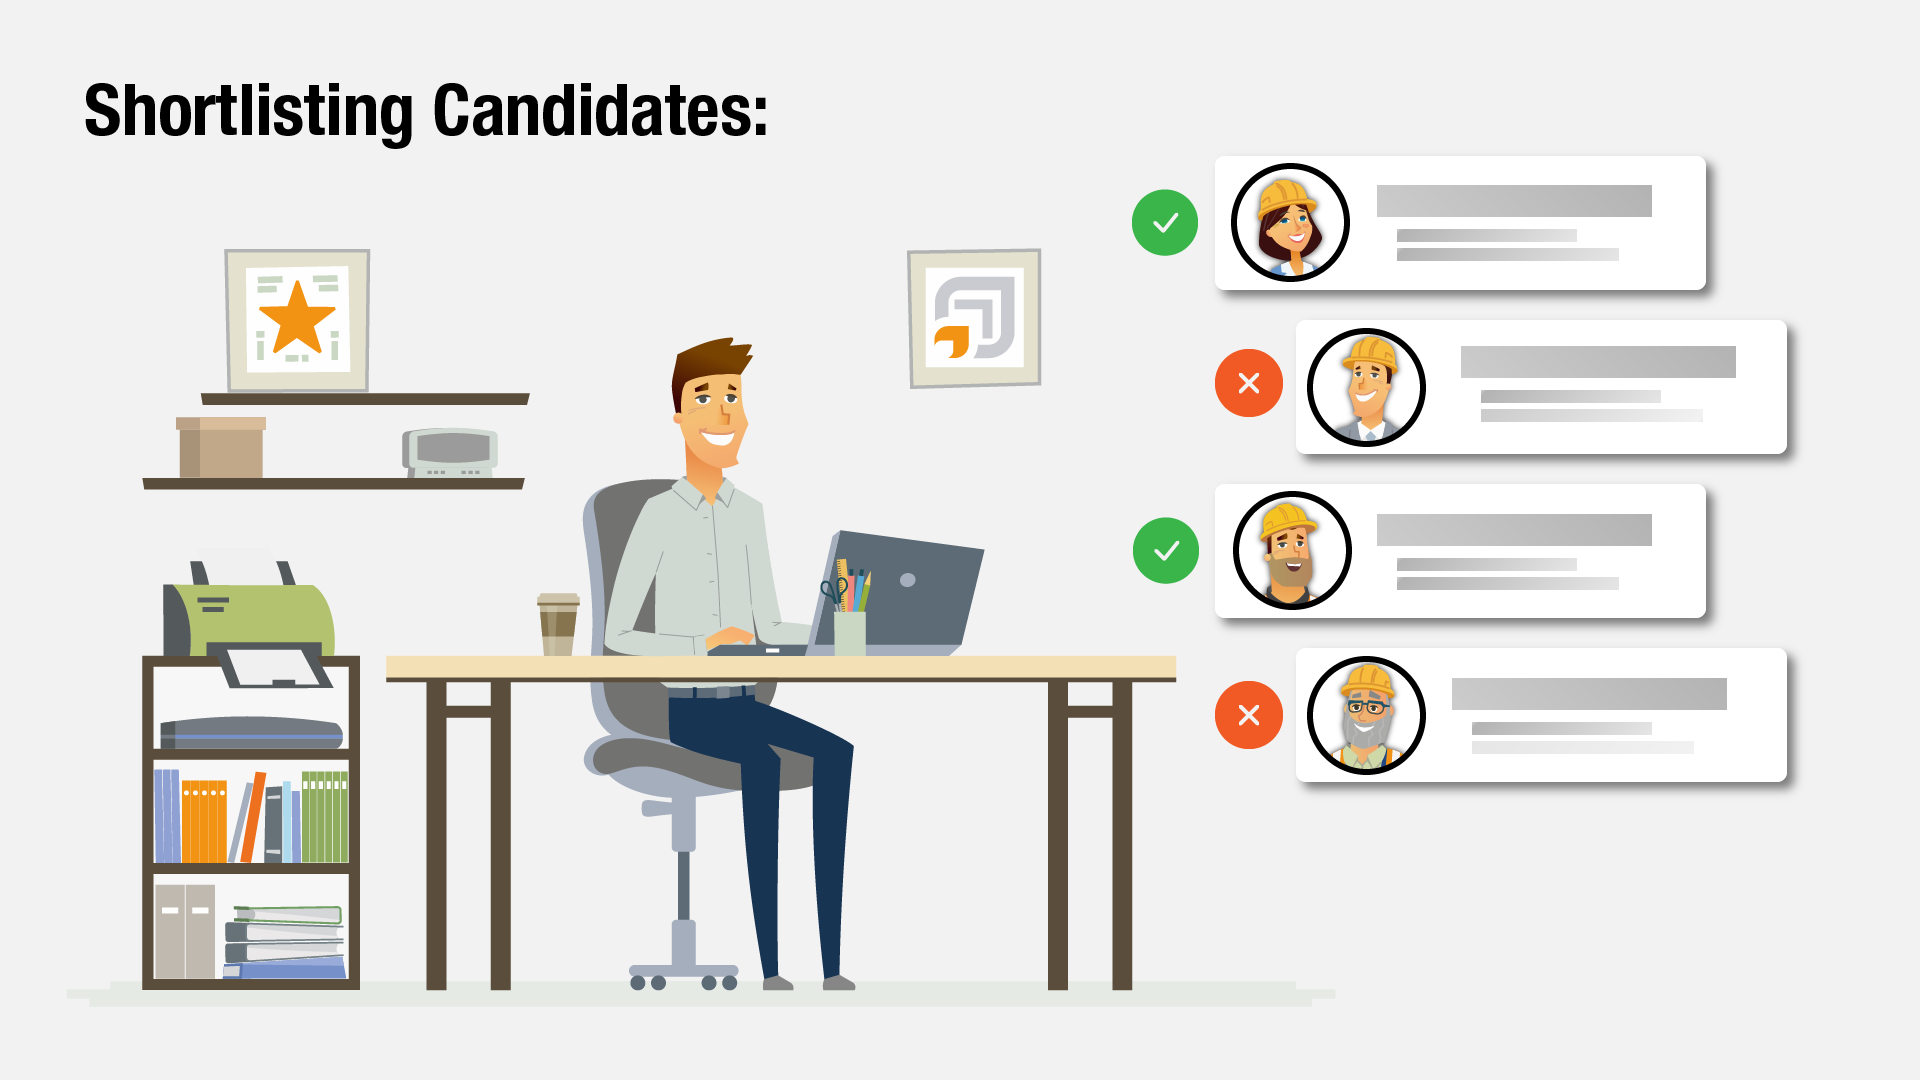 Shortlisting Candidates for hire